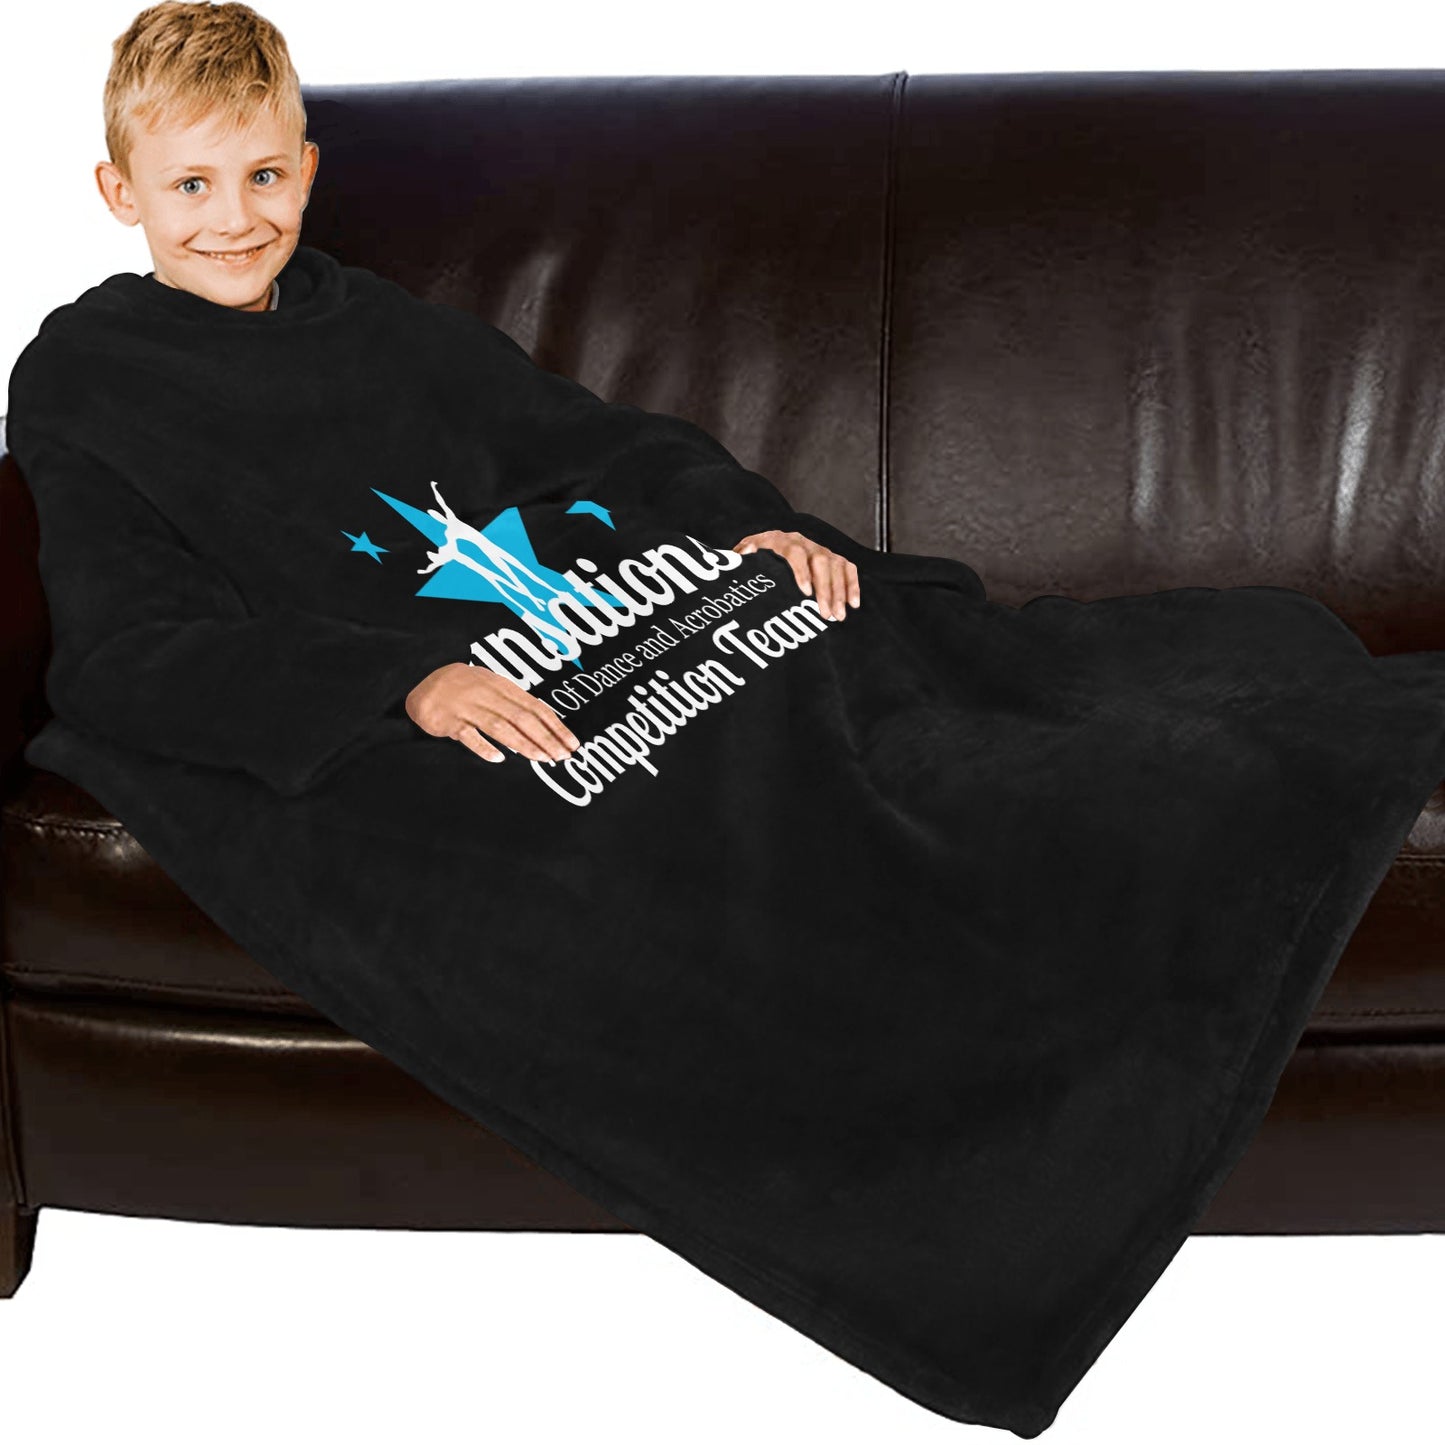 Dansations Competition Team Blanket Robe with Sleeves for Kids